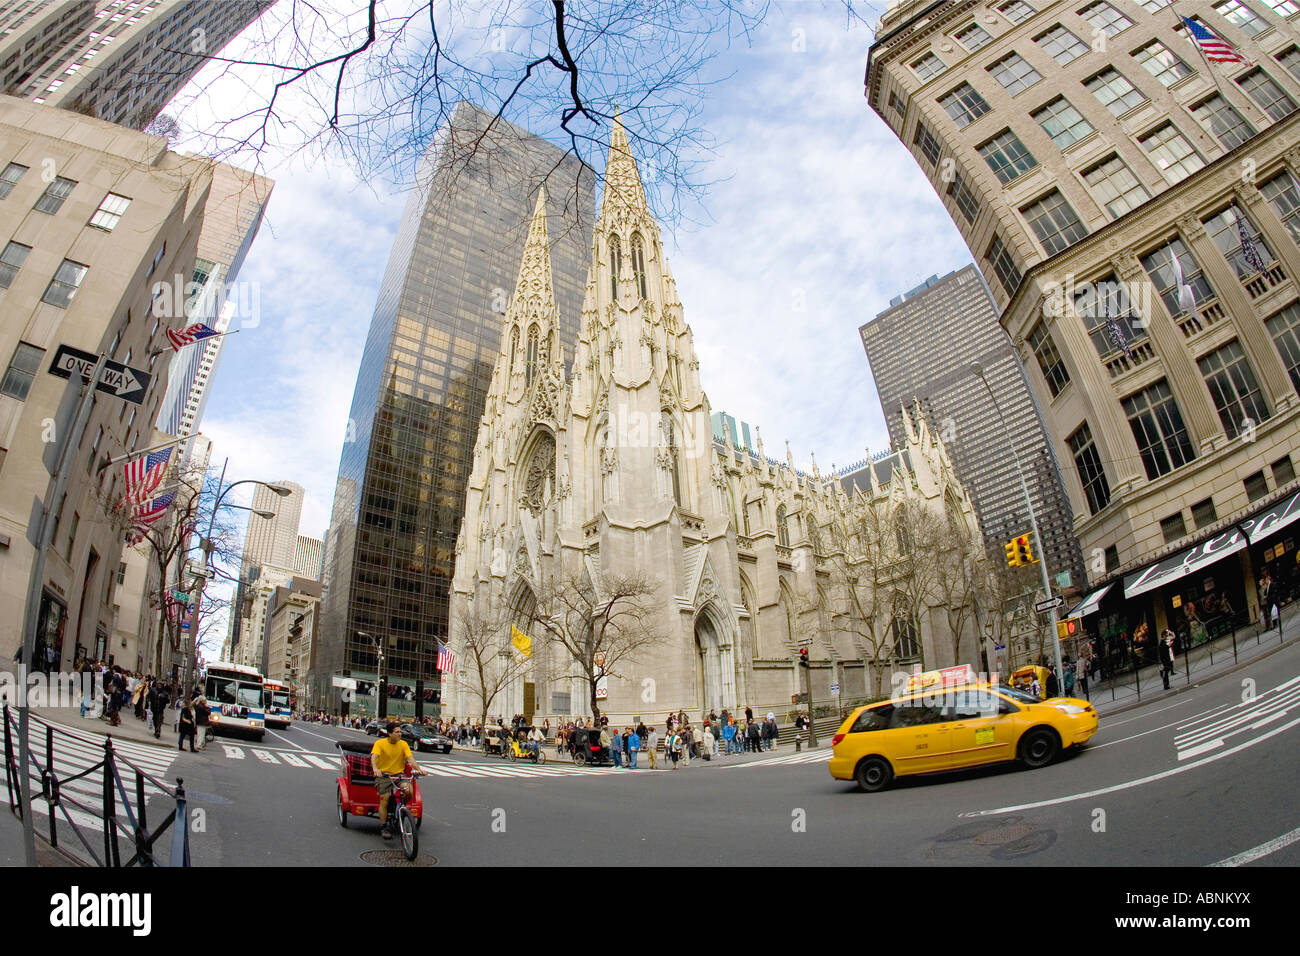 St Patricks Patrick's Cathedral and yellow taxi cab on 5th Fifth Avenue downtown Manhattan New York NY United States America Stock Photo